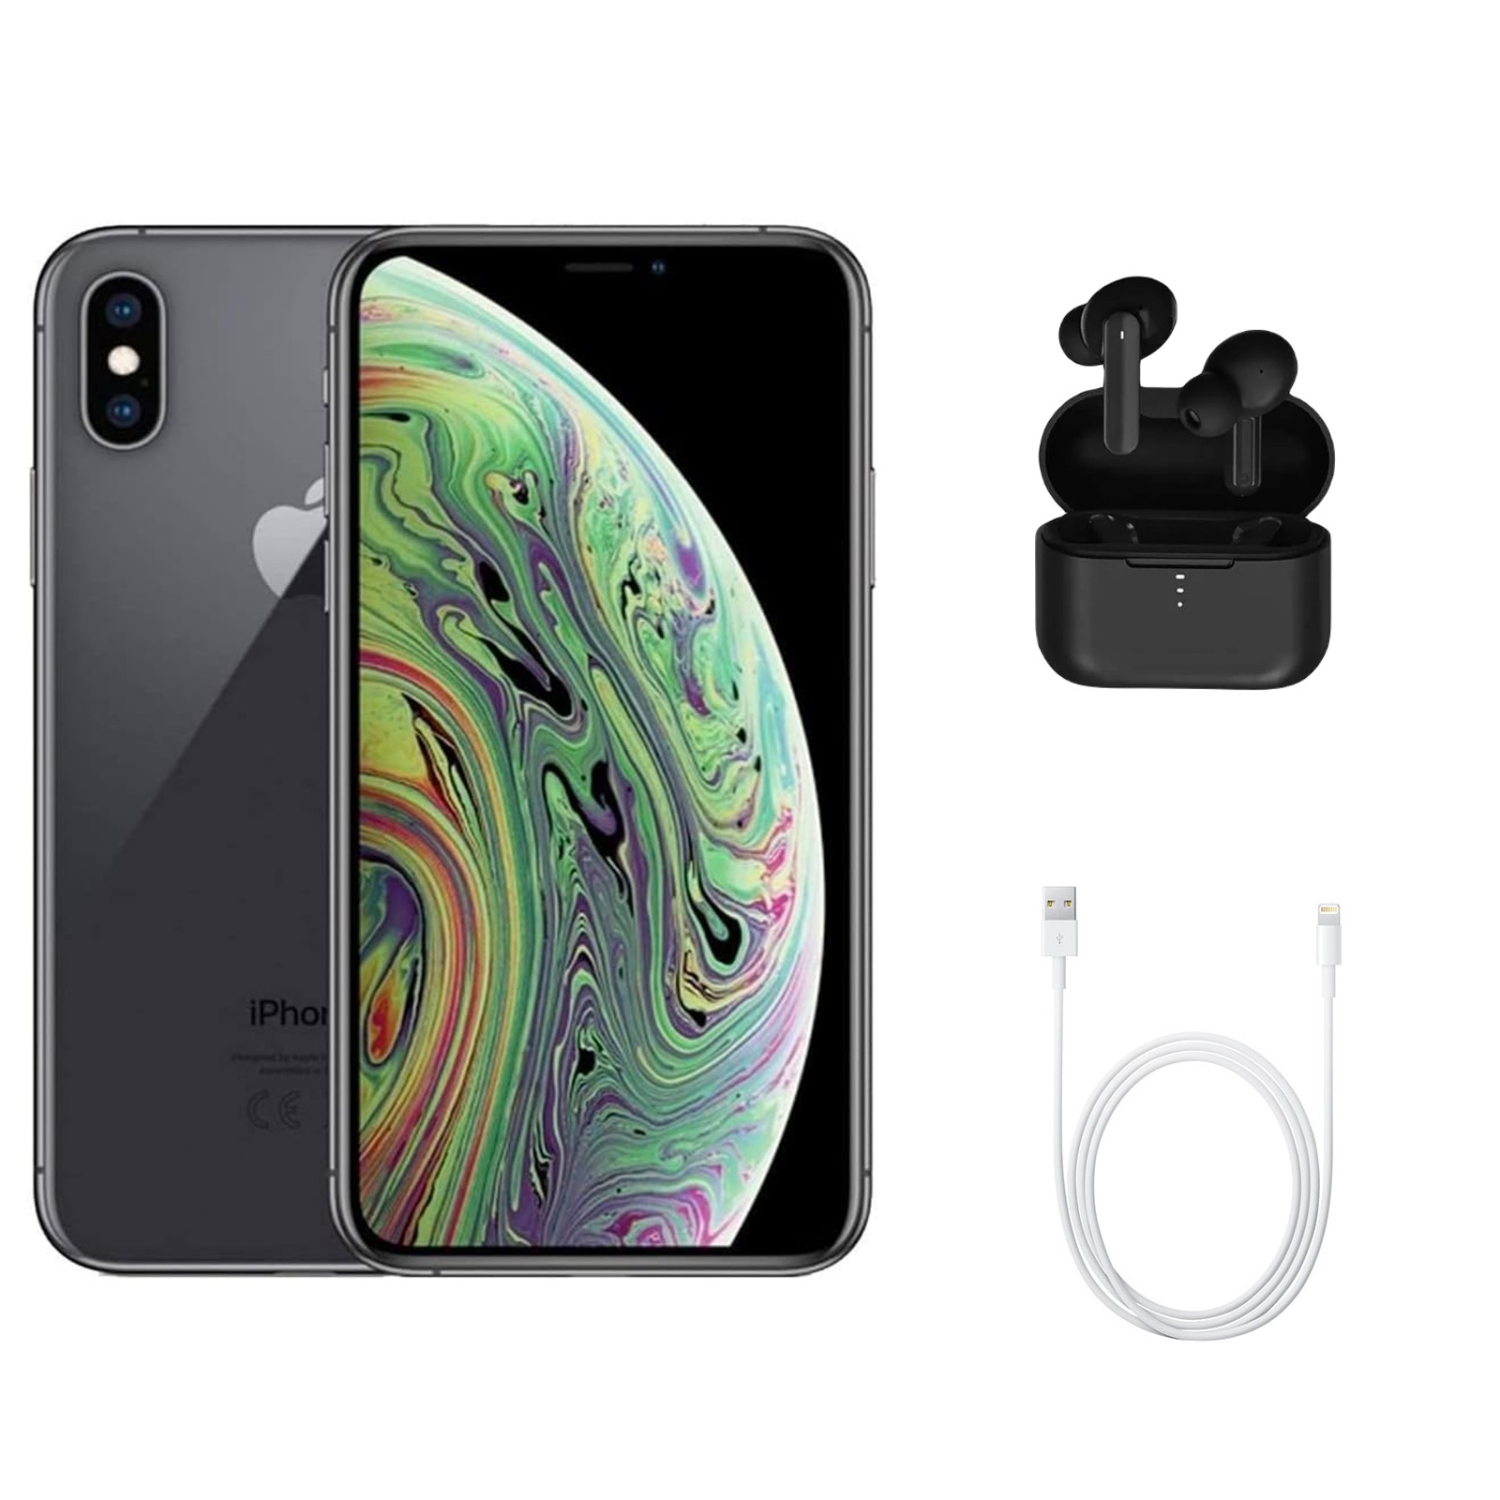 Refurbished (Good) Apple iPhone XS Max A1921 (Fully Unlocked) 64GB Space Gray w/ Wireless Earbuds